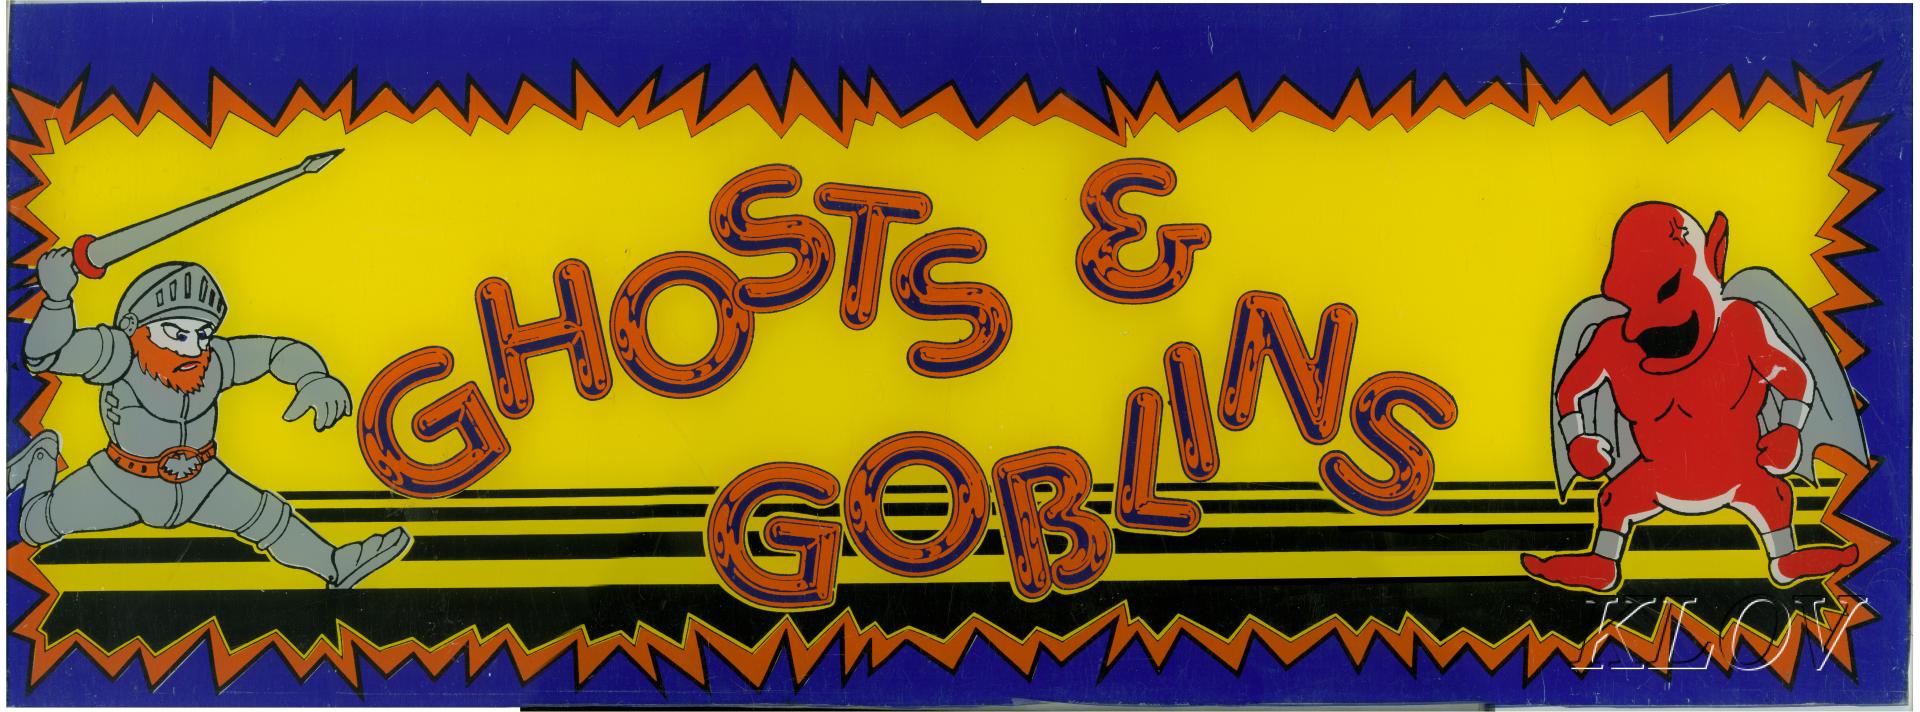 Ghost'n Goblins Arcade, lots of new parts and LCD monitor, sharp-Delivery  time 6-8 weeks